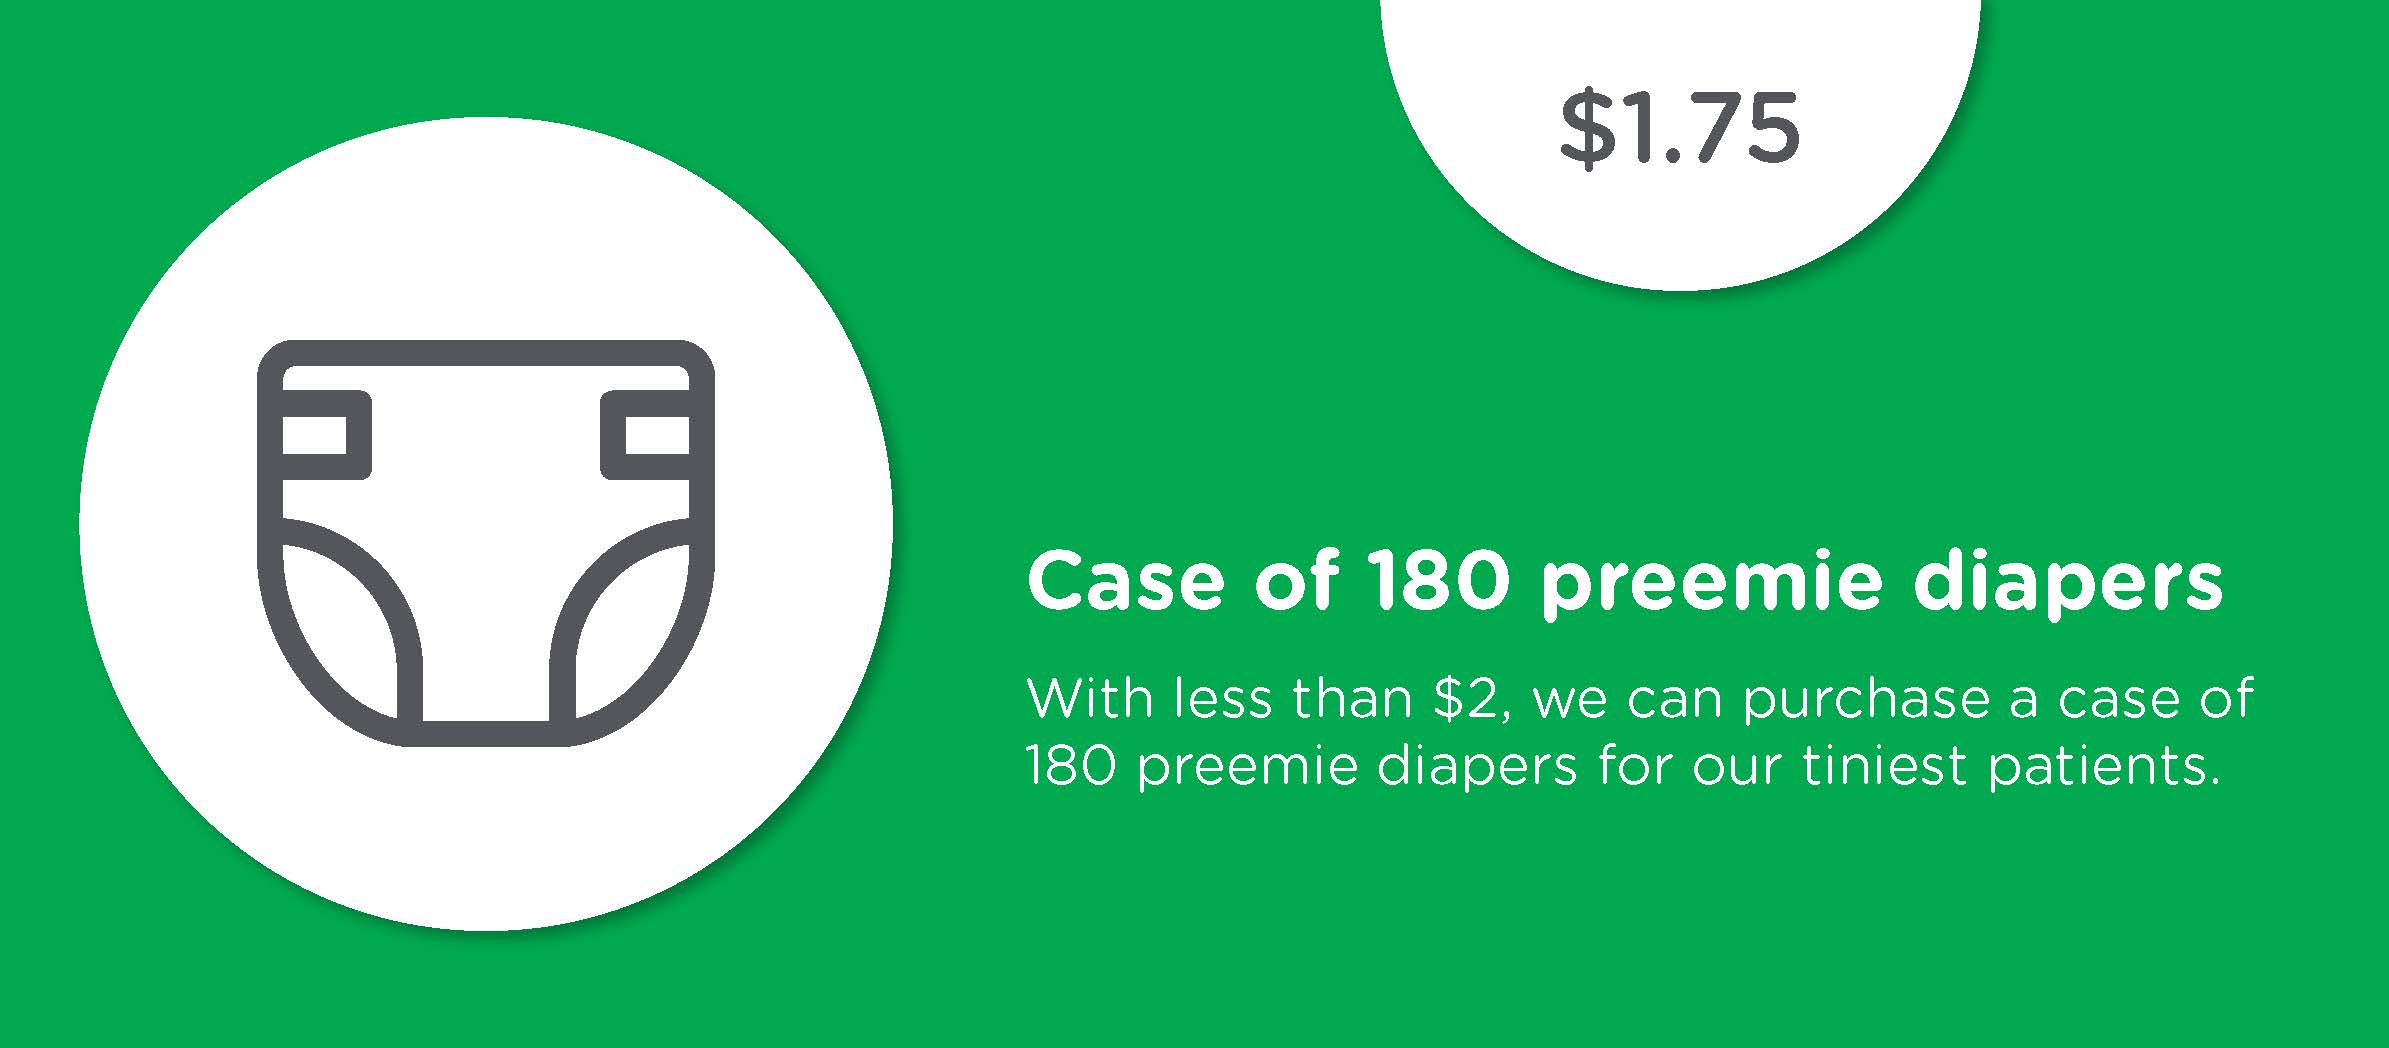 Cost of preemie diapers graphic